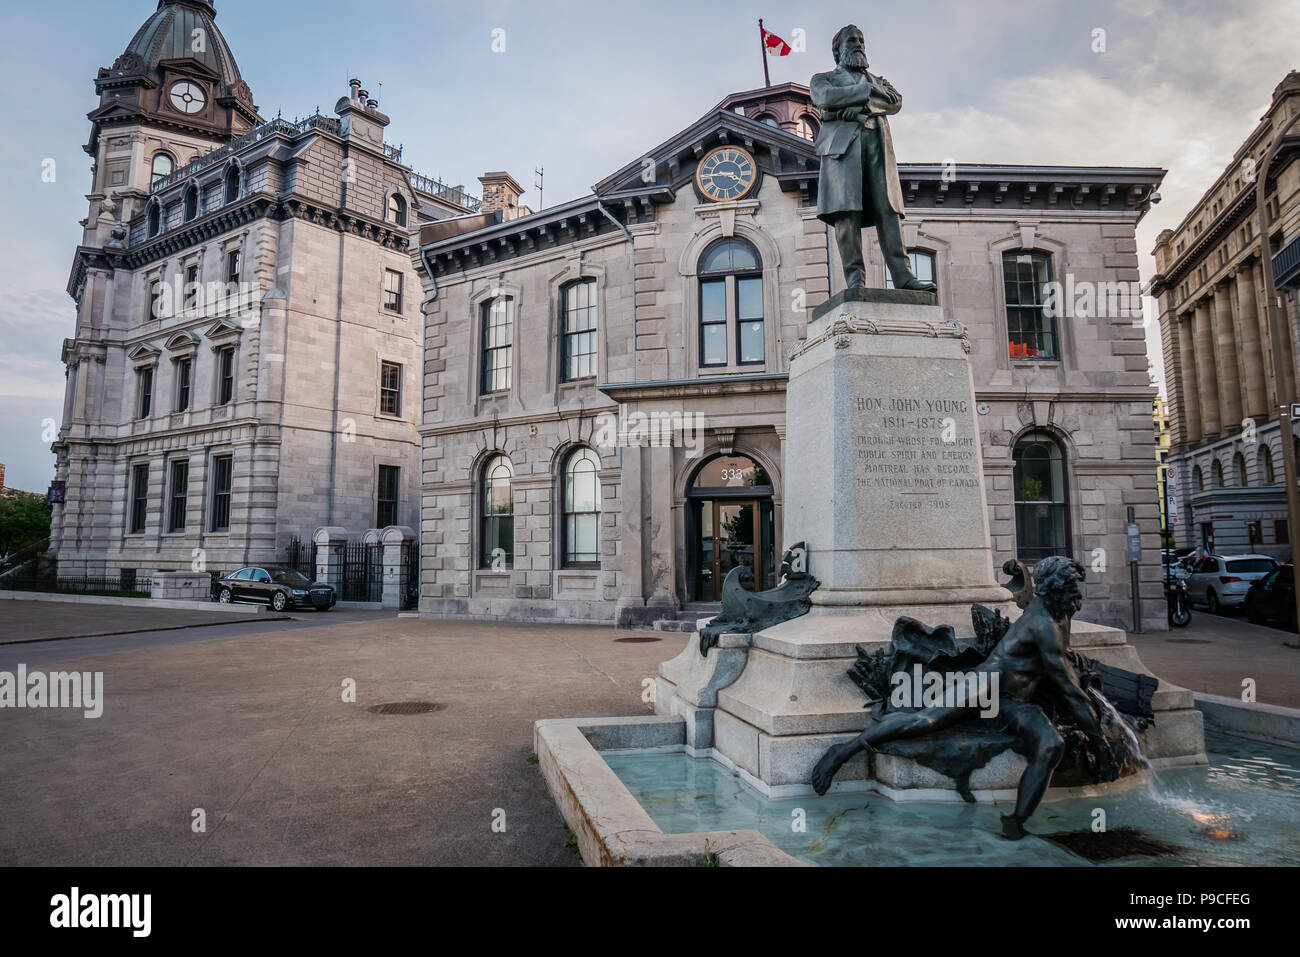 John Young monumento old montreal Foto Stock